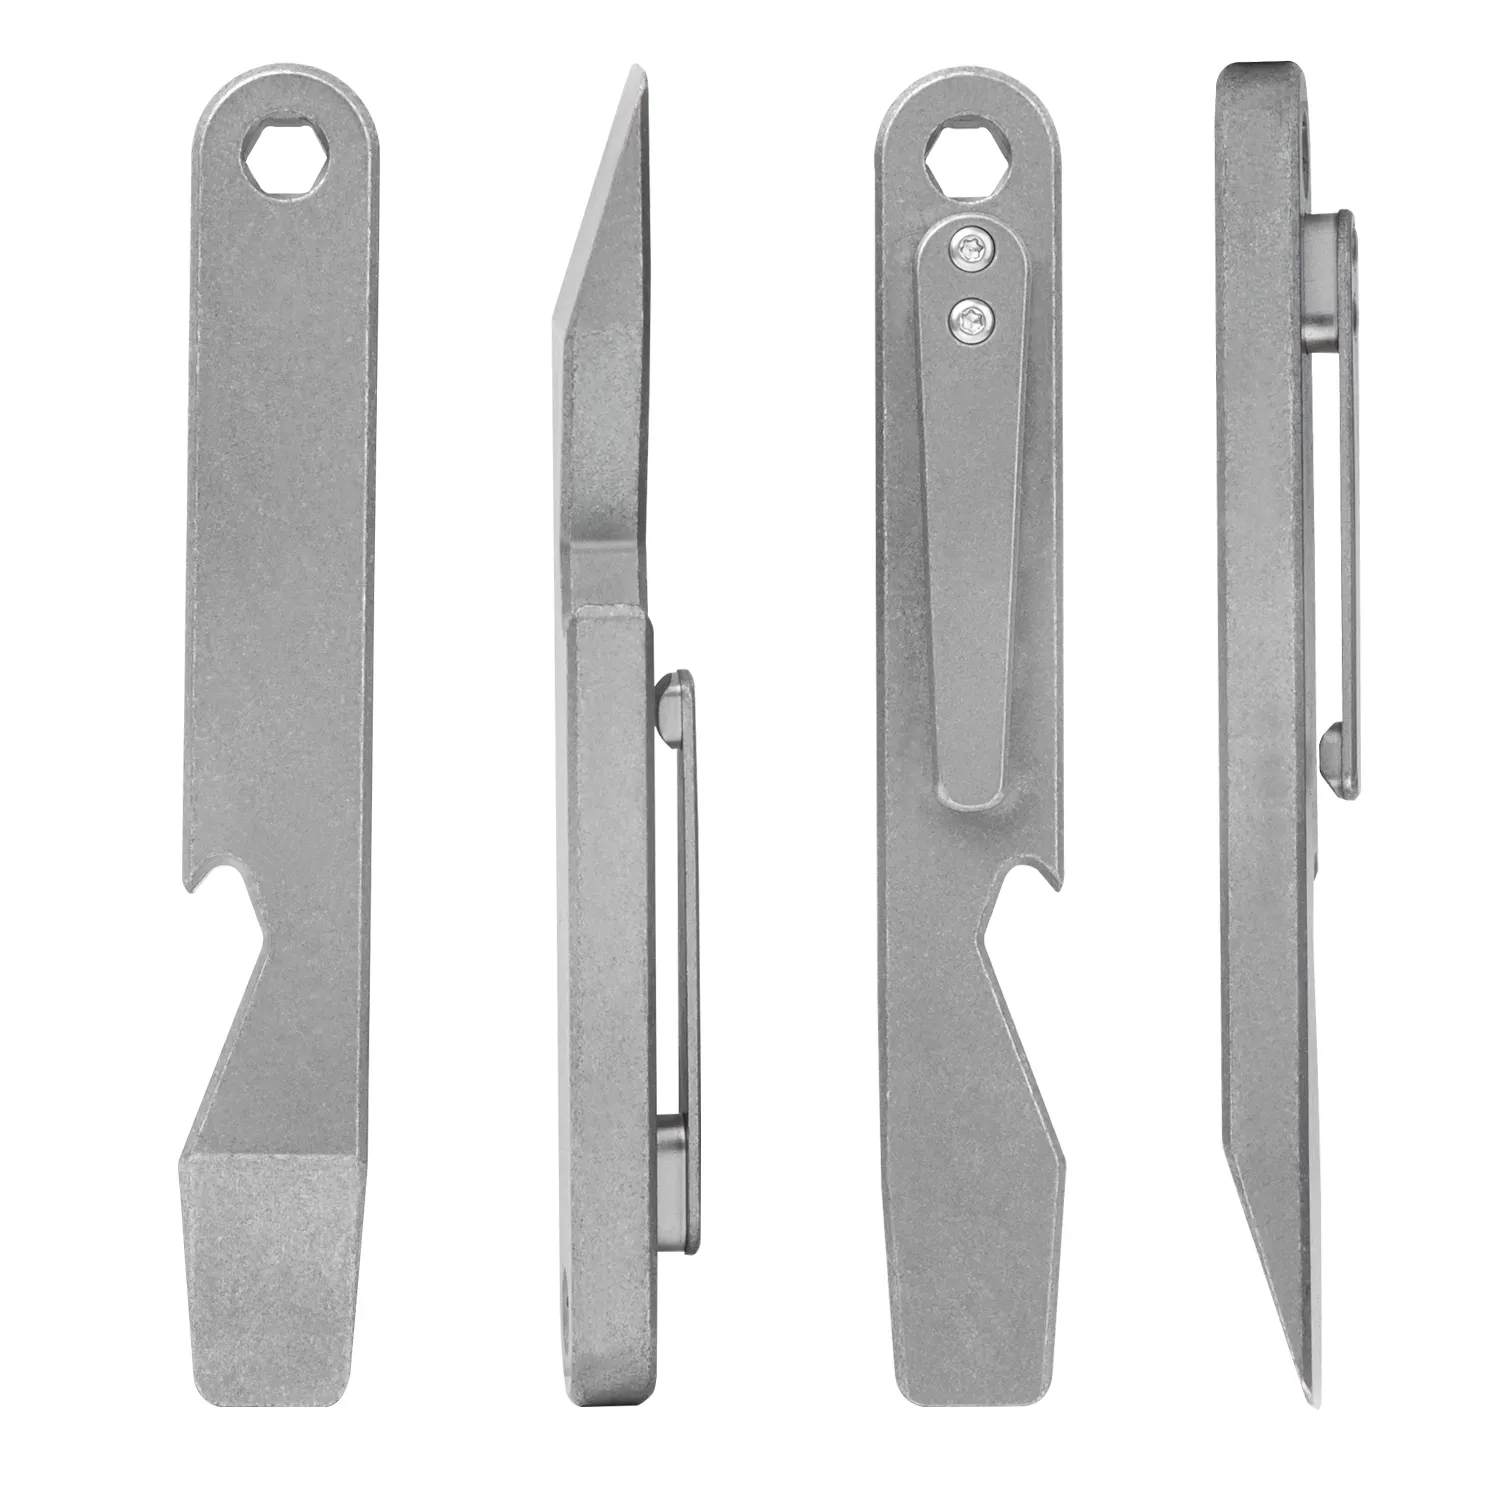 Titanium Pry Bar EDC Multi Function Wrench Pocket Tool with Clip Lanyard Hole